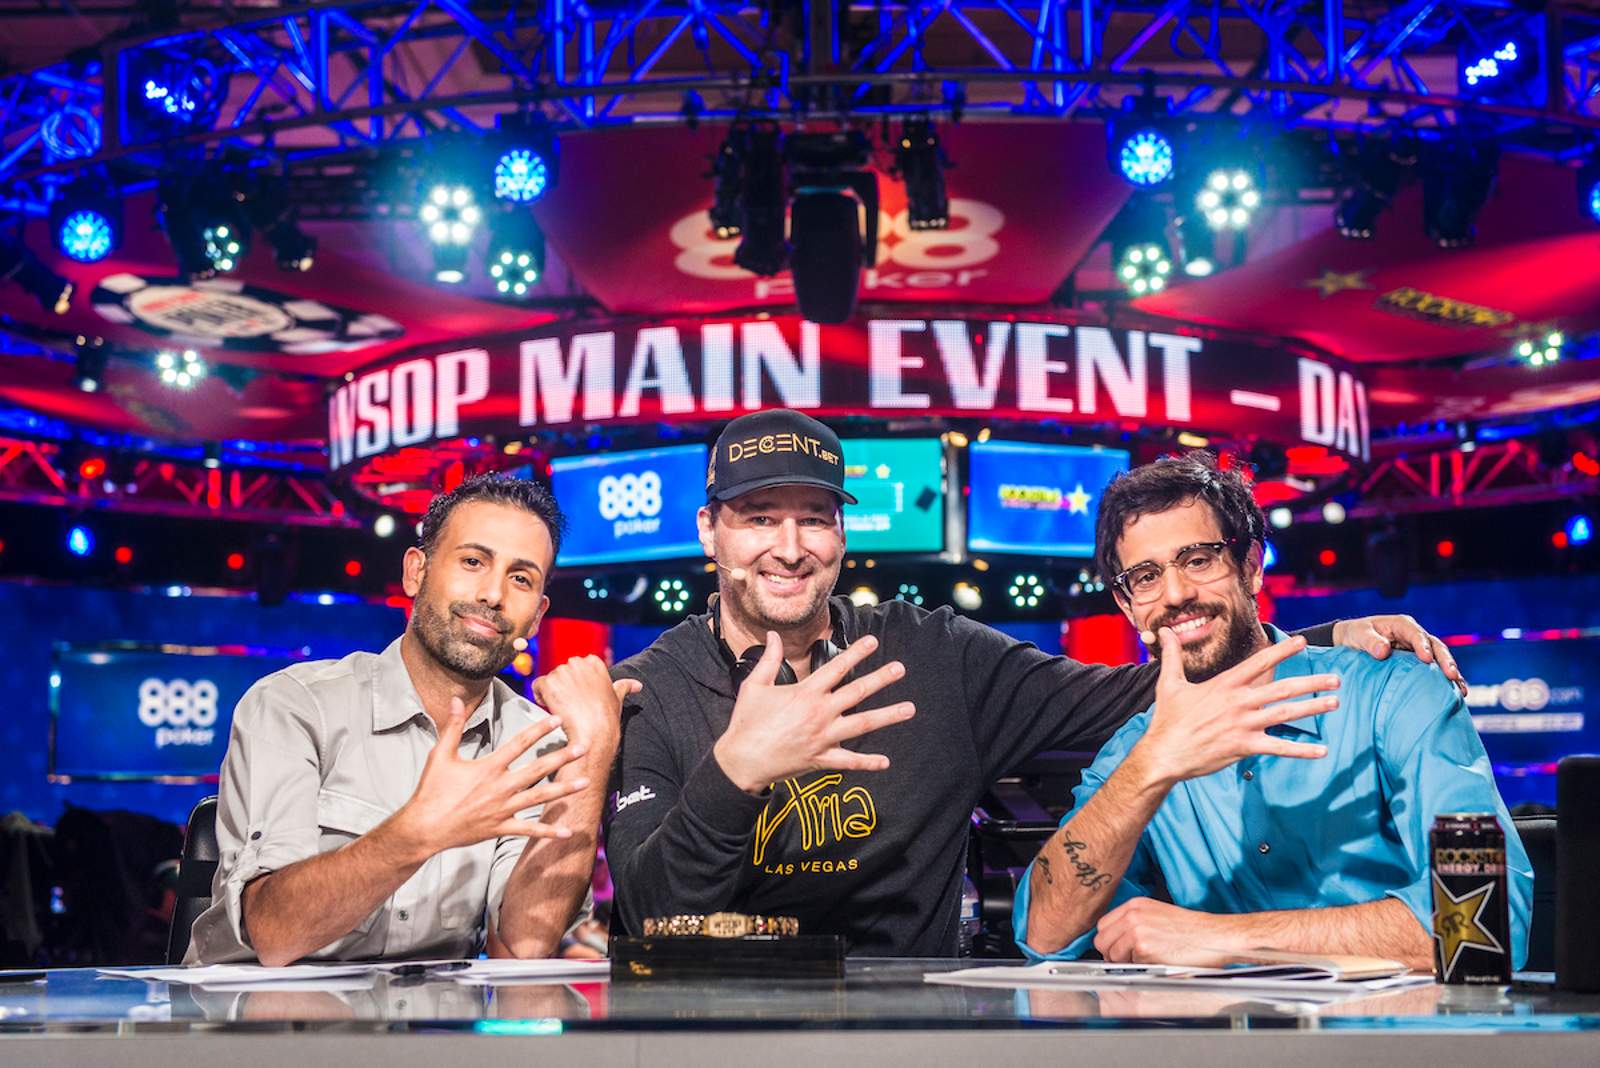 Will Phil Hellmuth Win His 16th Bracelet at the 2019 World Series of Poker?